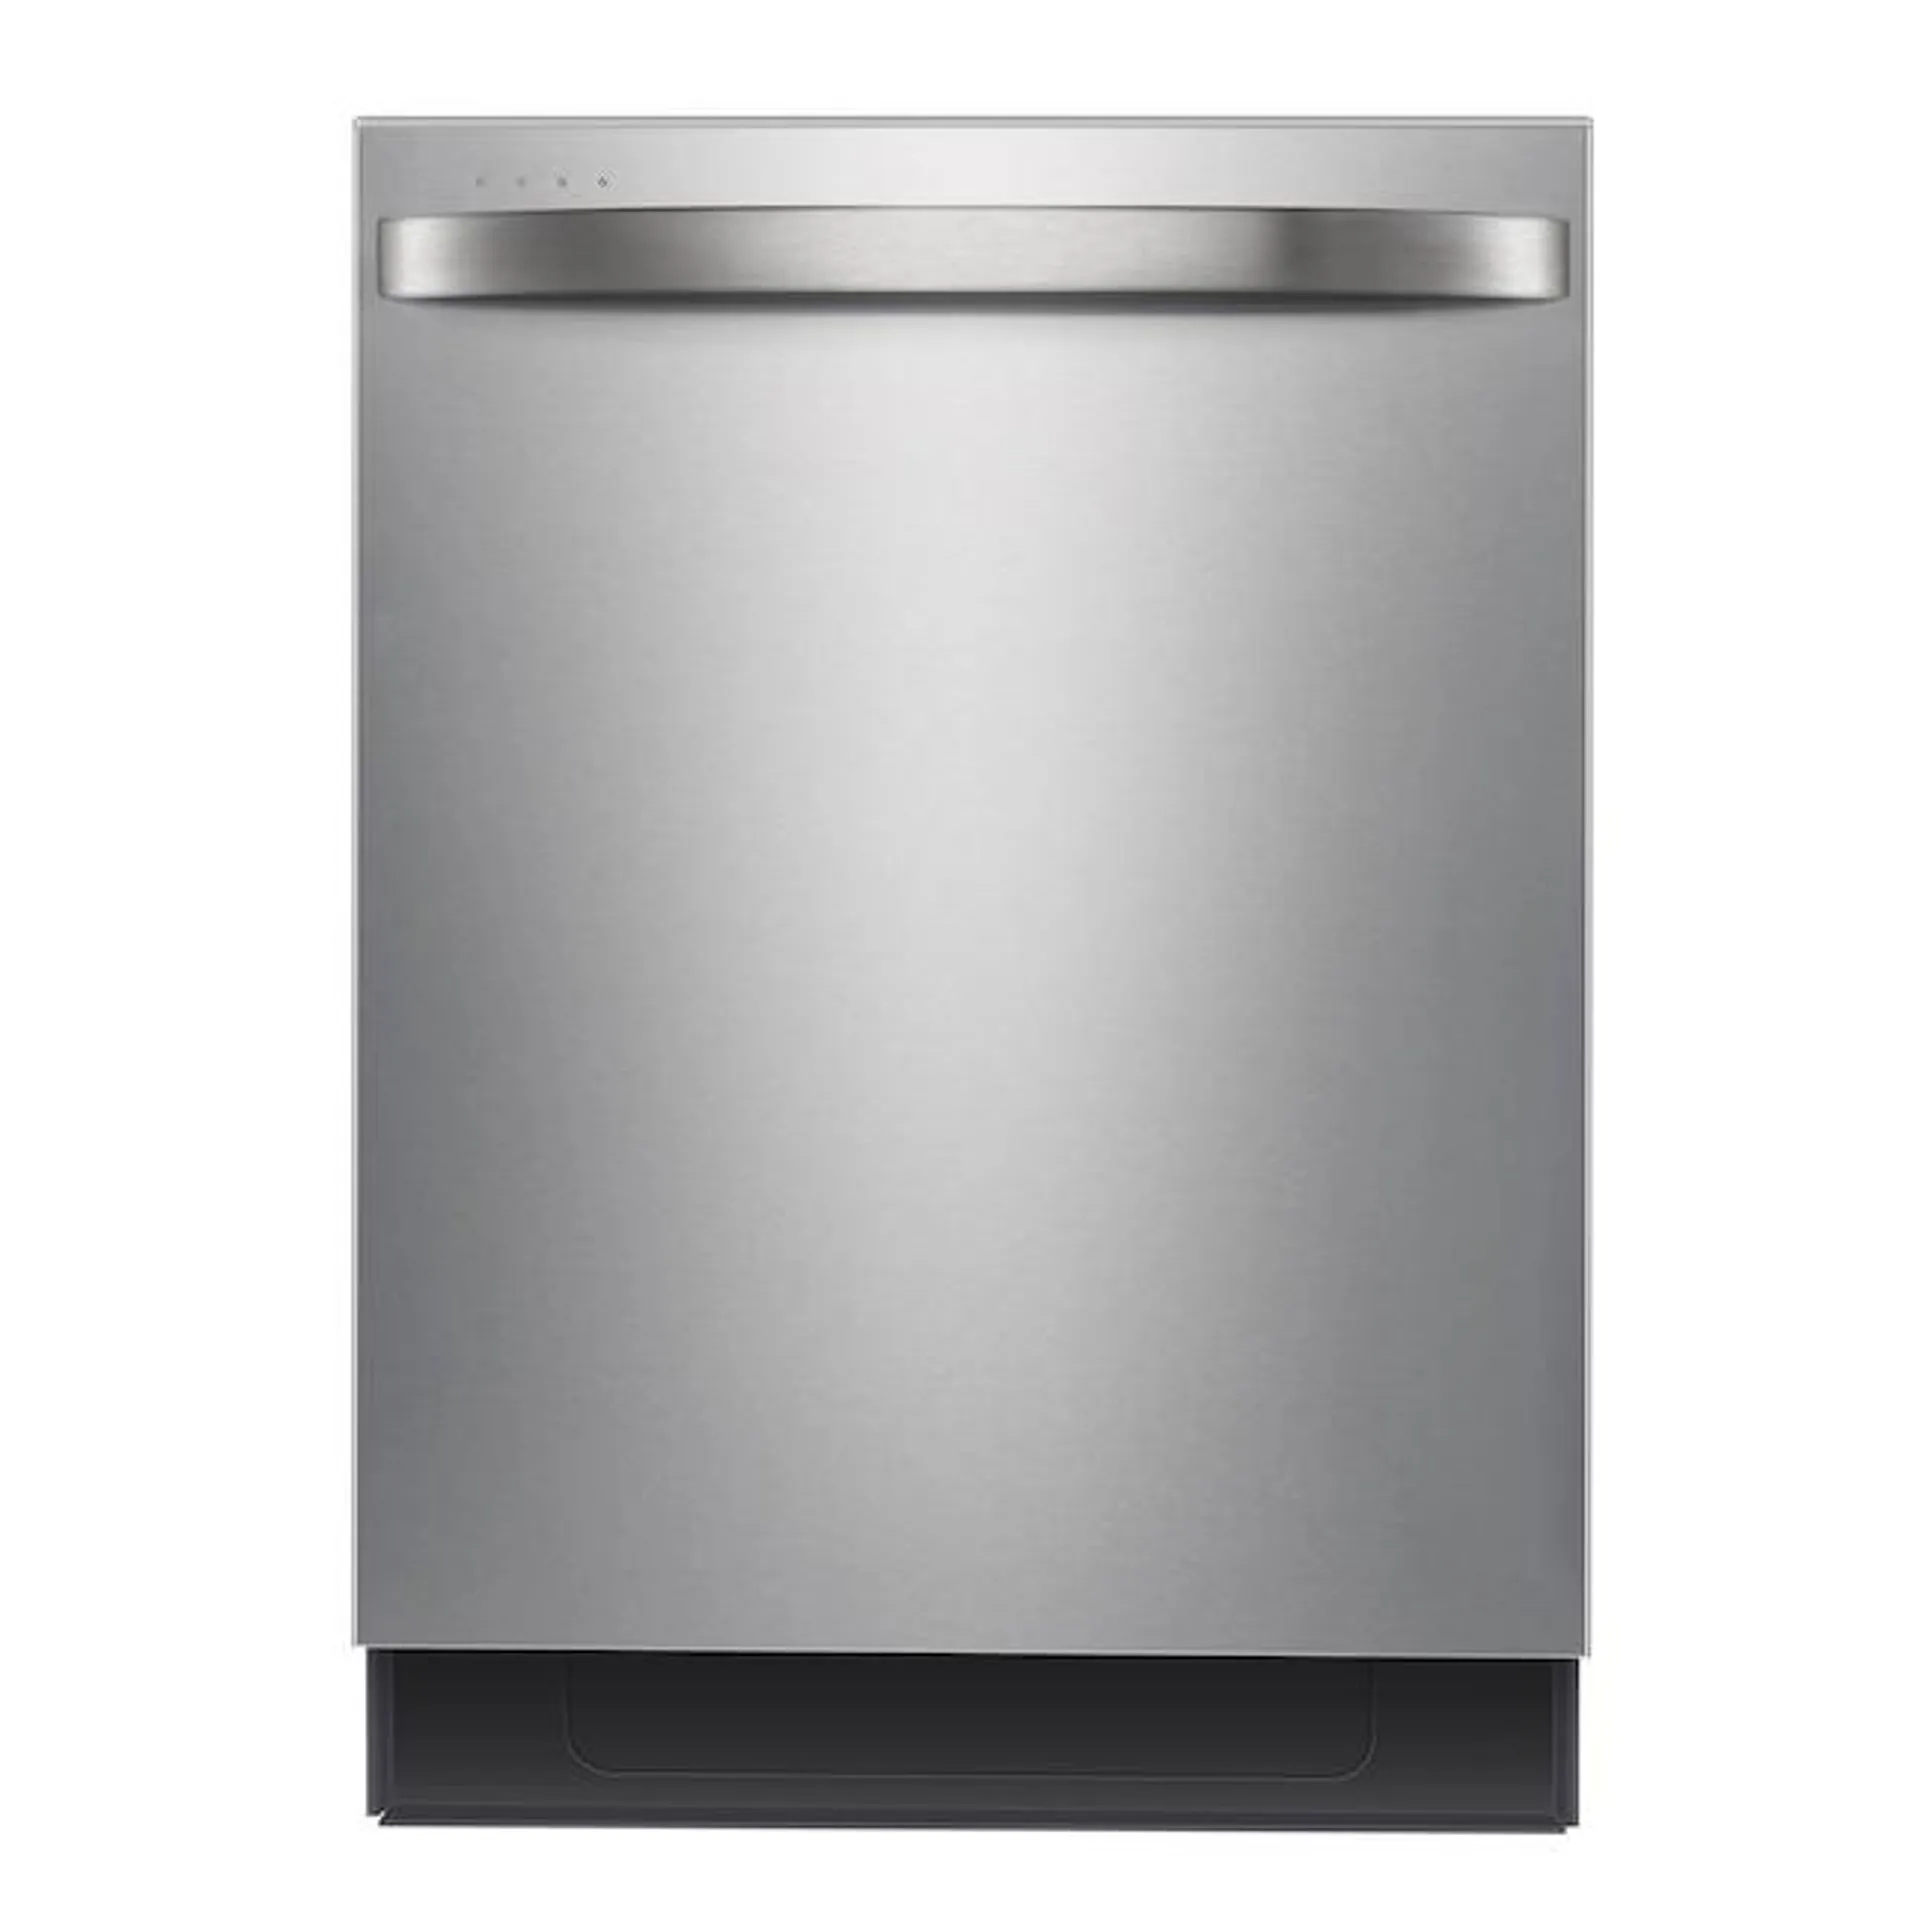 Midea Top Control 24-in Built-In Dishwasher With Third Rack (Stainless Steel) ENERGY STAR, 45-dBA